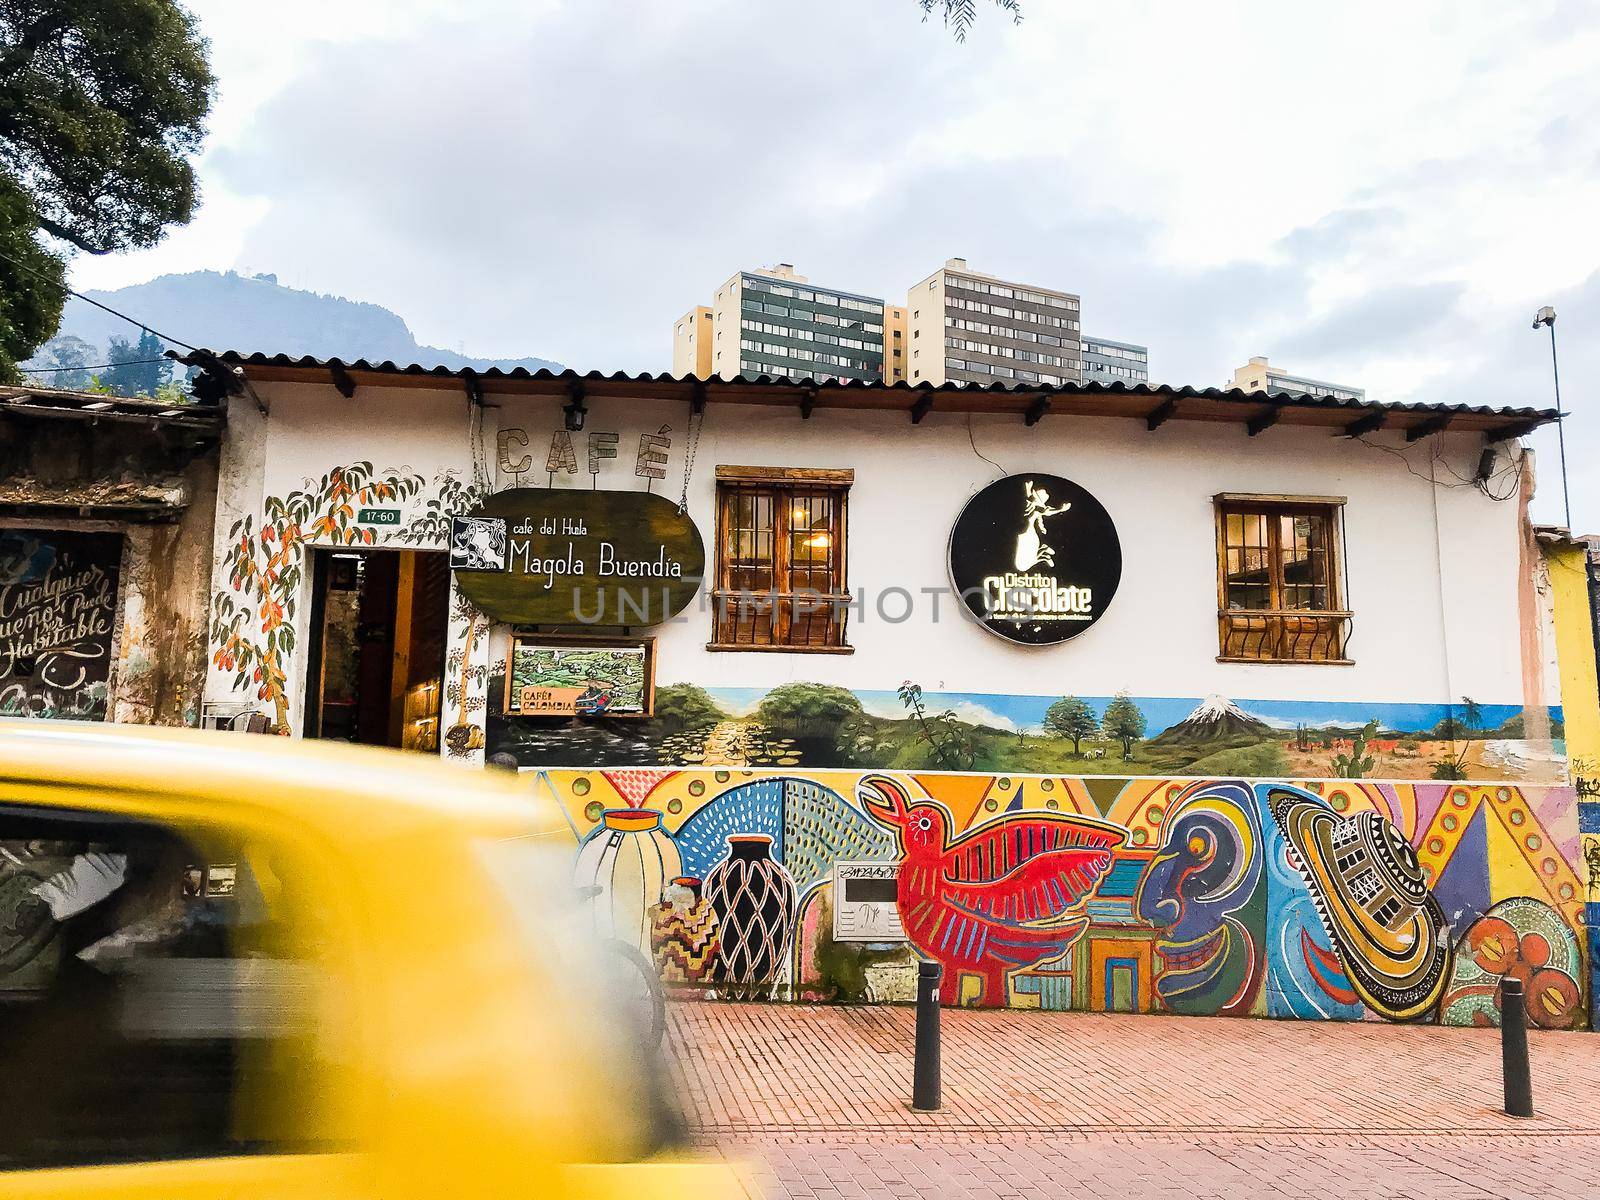 Street view in Bogota, Colombia with taxi and art mural.